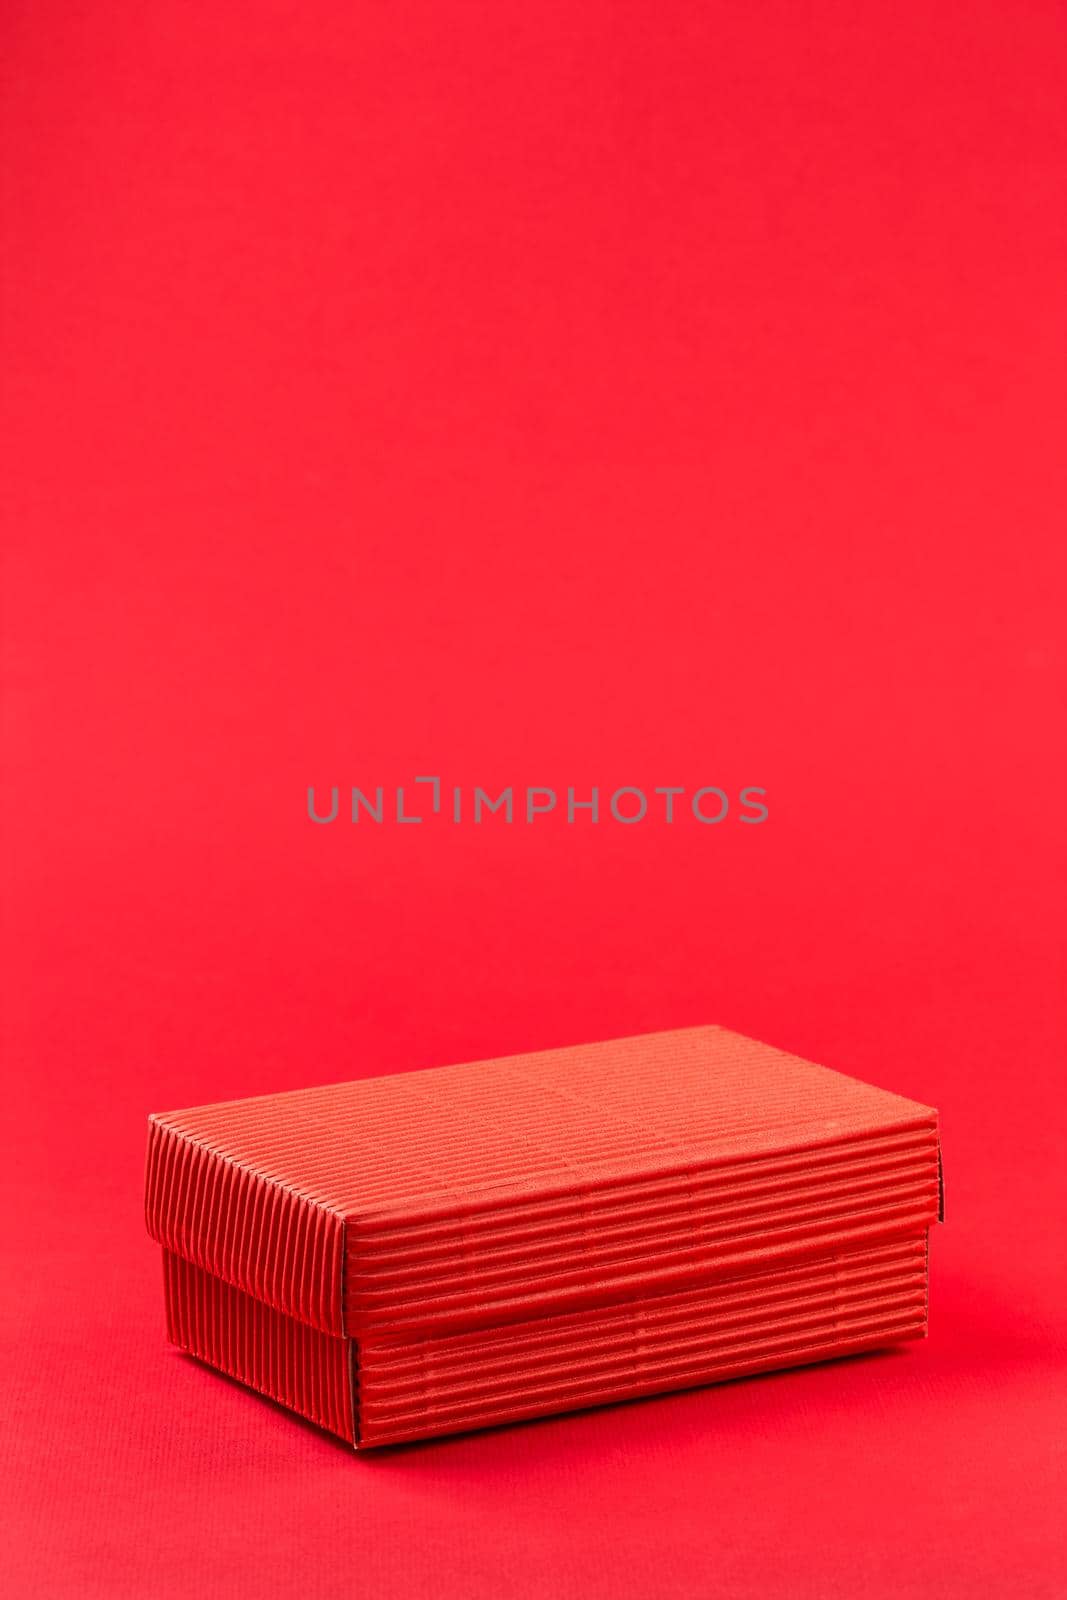 Monochromatic photo of red closed corrugated cardboard box on red background. Valentine's Day gift packaging concept